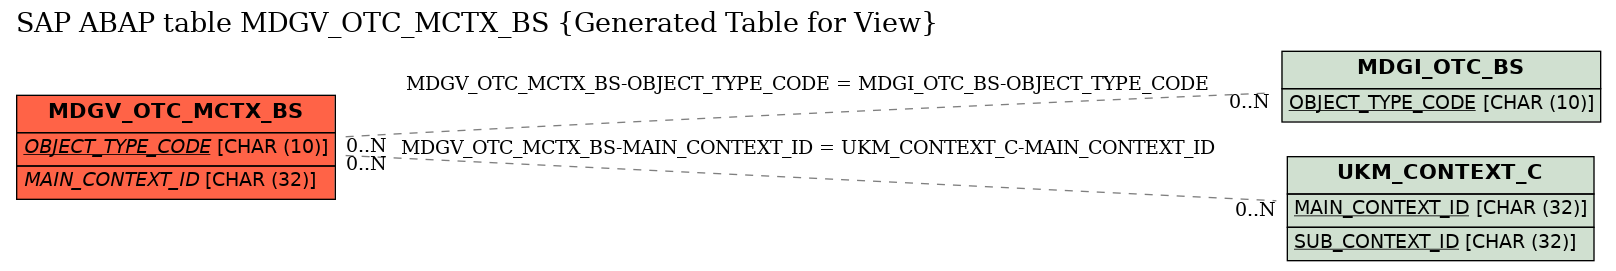 E-R Diagram for table MDGV_OTC_MCTX_BS (Generated Table for View)